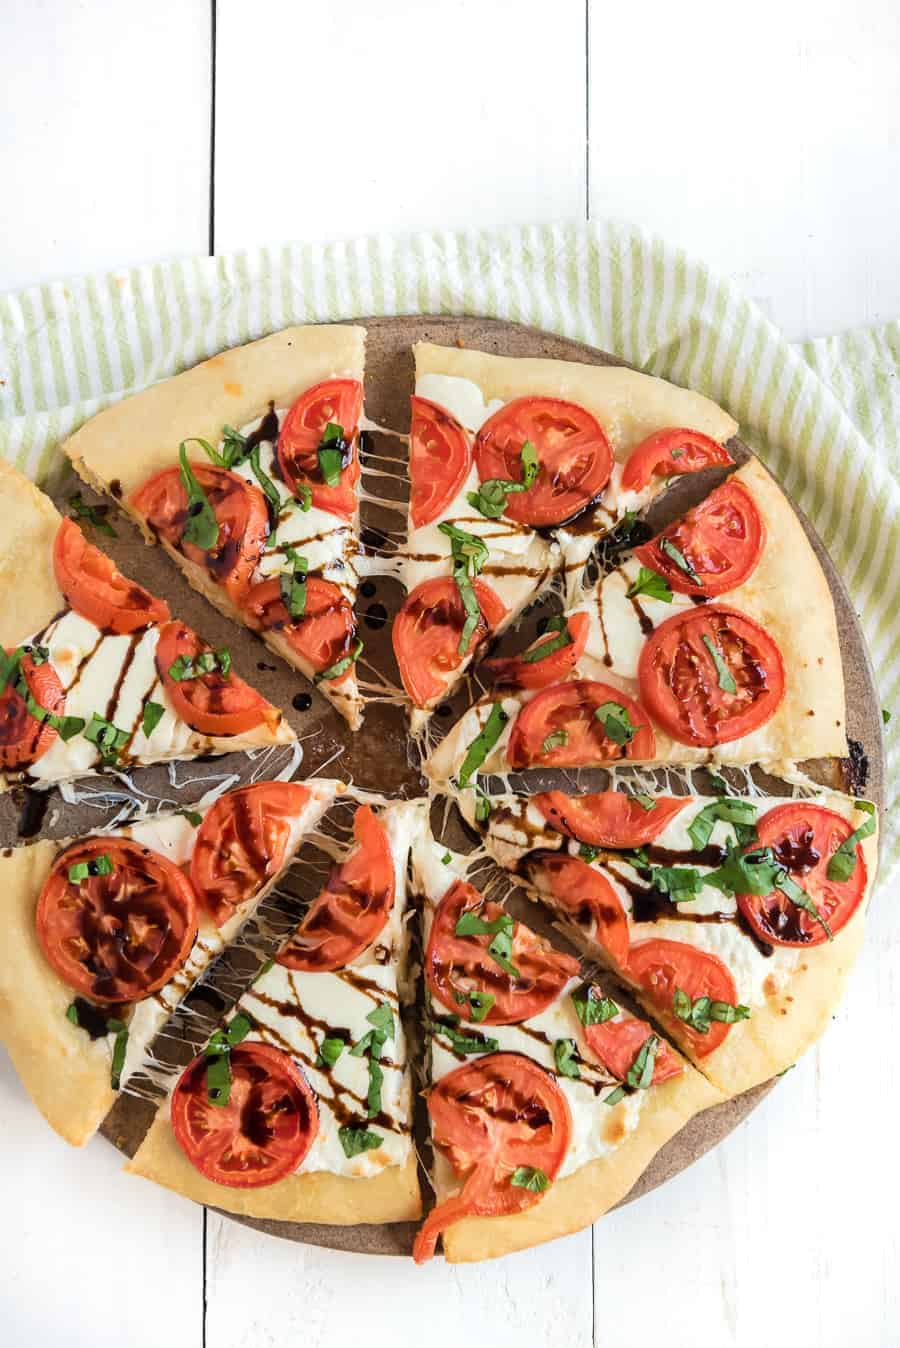 This easy margherita pizza recipe is made of a simple homemade pizza dough with fresh tomato, mozzarella, and basil for a fun and casual meal you can make at home. It's the ideal meal for a busy weeknight or a low-key movie night on the weekend, and it's beyond simple to make from scratch with minimal ingredients. #pizza #margheritapizza #margheritapizzarecipe #pizzarecipe #homemadepizza #homemadepizzadough #pizzadoughrecipe